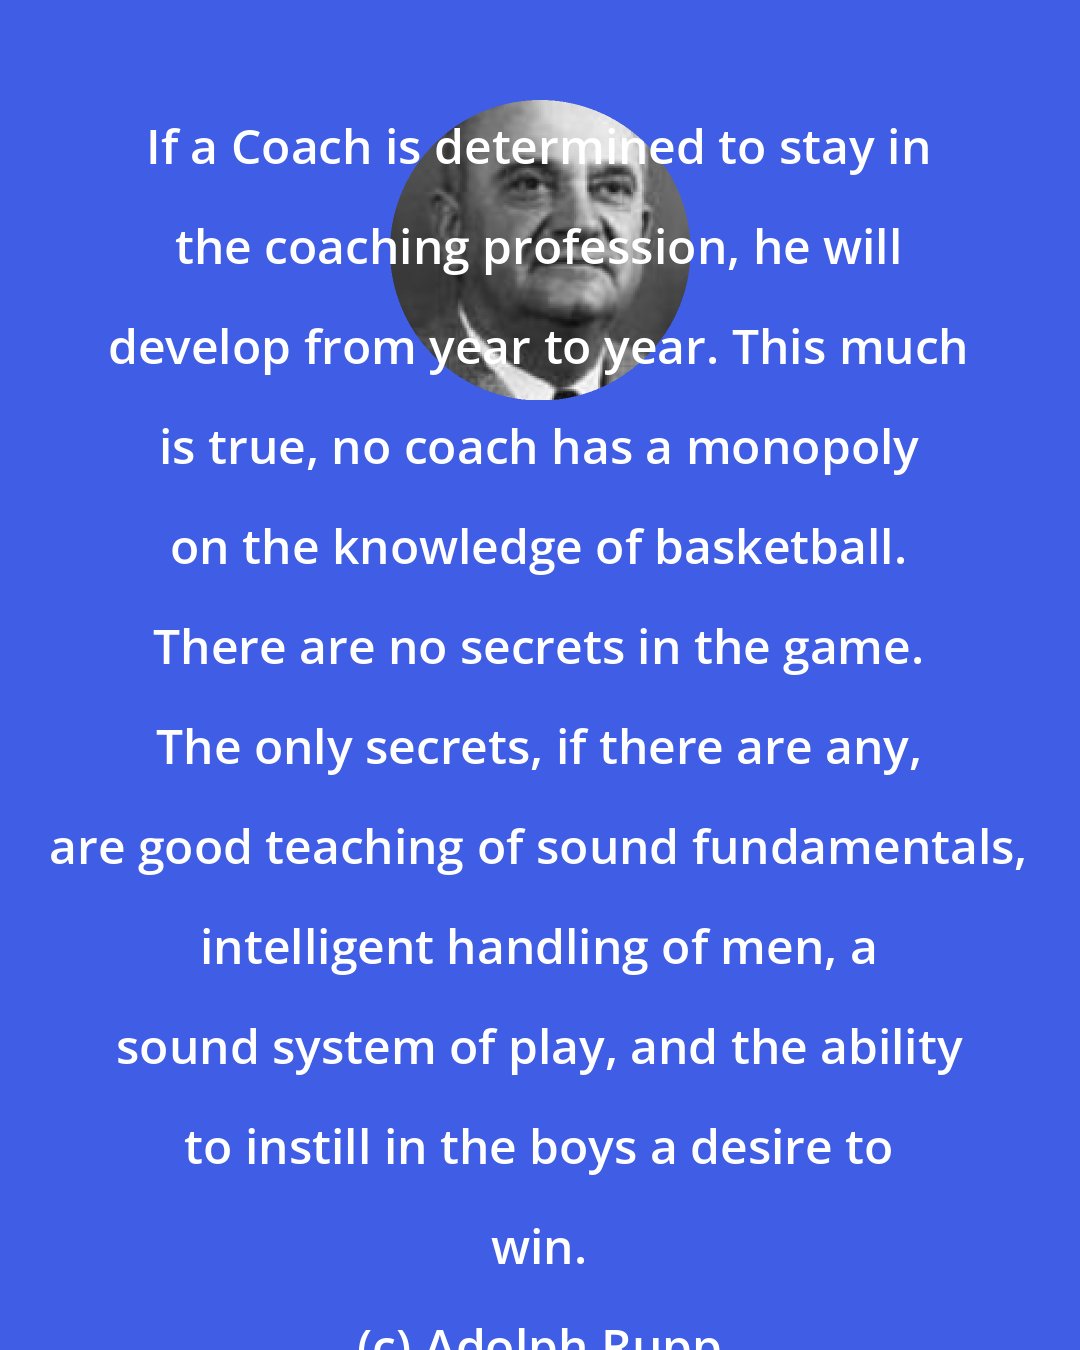 Adolph Rupp: If a Coach is determined to stay in the coaching profession, he will develop from year to year. This much is true, no coach has a monopoly on the knowledge of basketball. There are no secrets in the game. The only secrets, if there are any, are good teaching of sound fundamentals, intelligent handling of men, a sound system of play, and the ability to instill in the boys a desire to win.